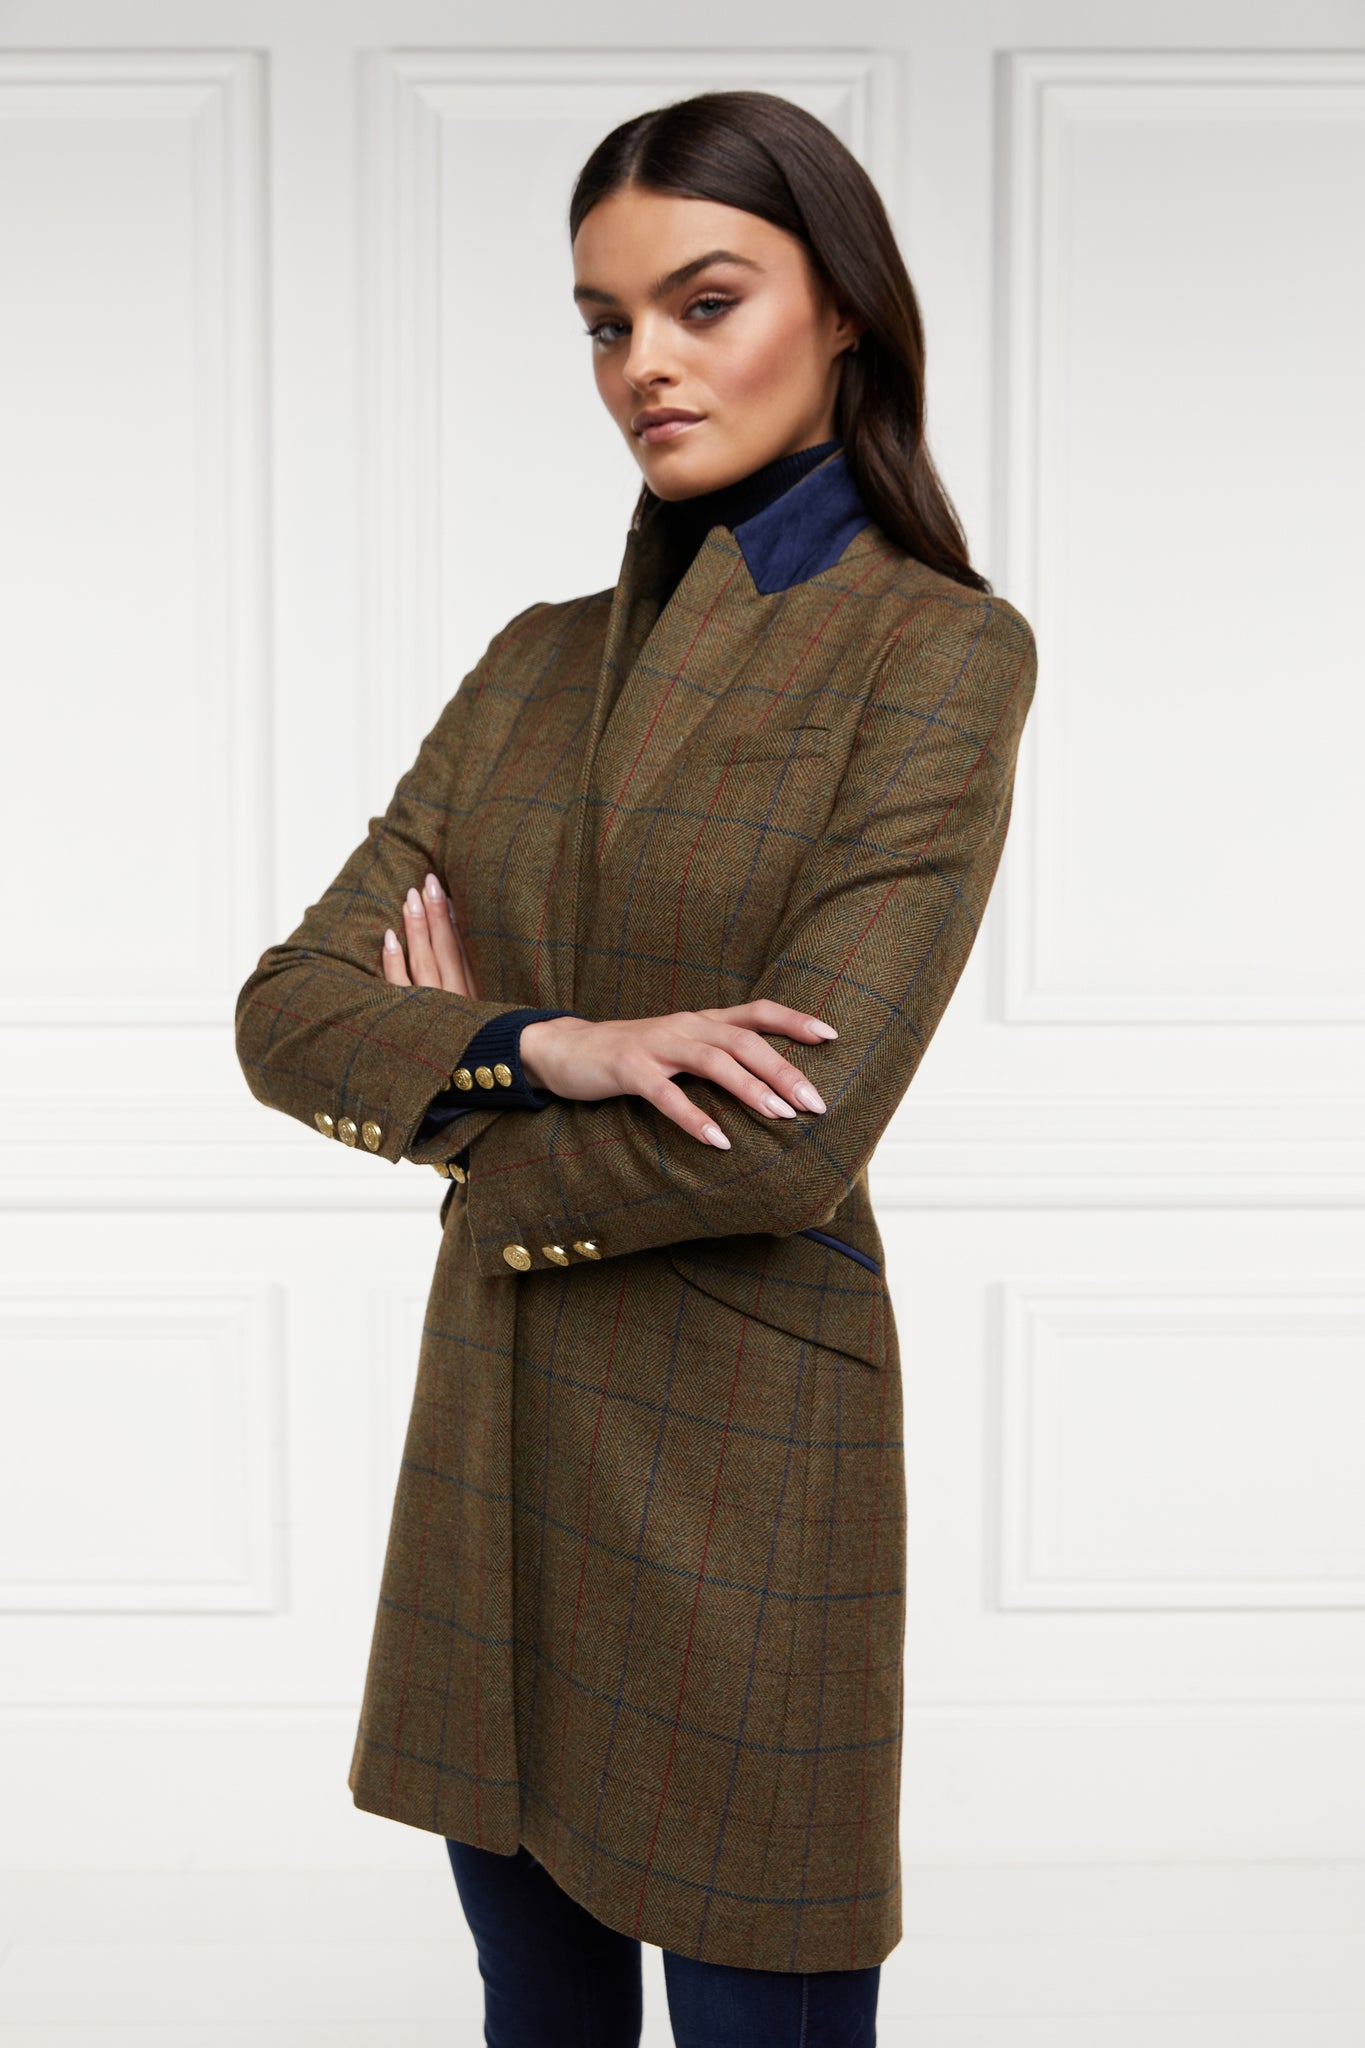 womens dark green and navy tweed mid-length single breasted coat detailed with gold hardware